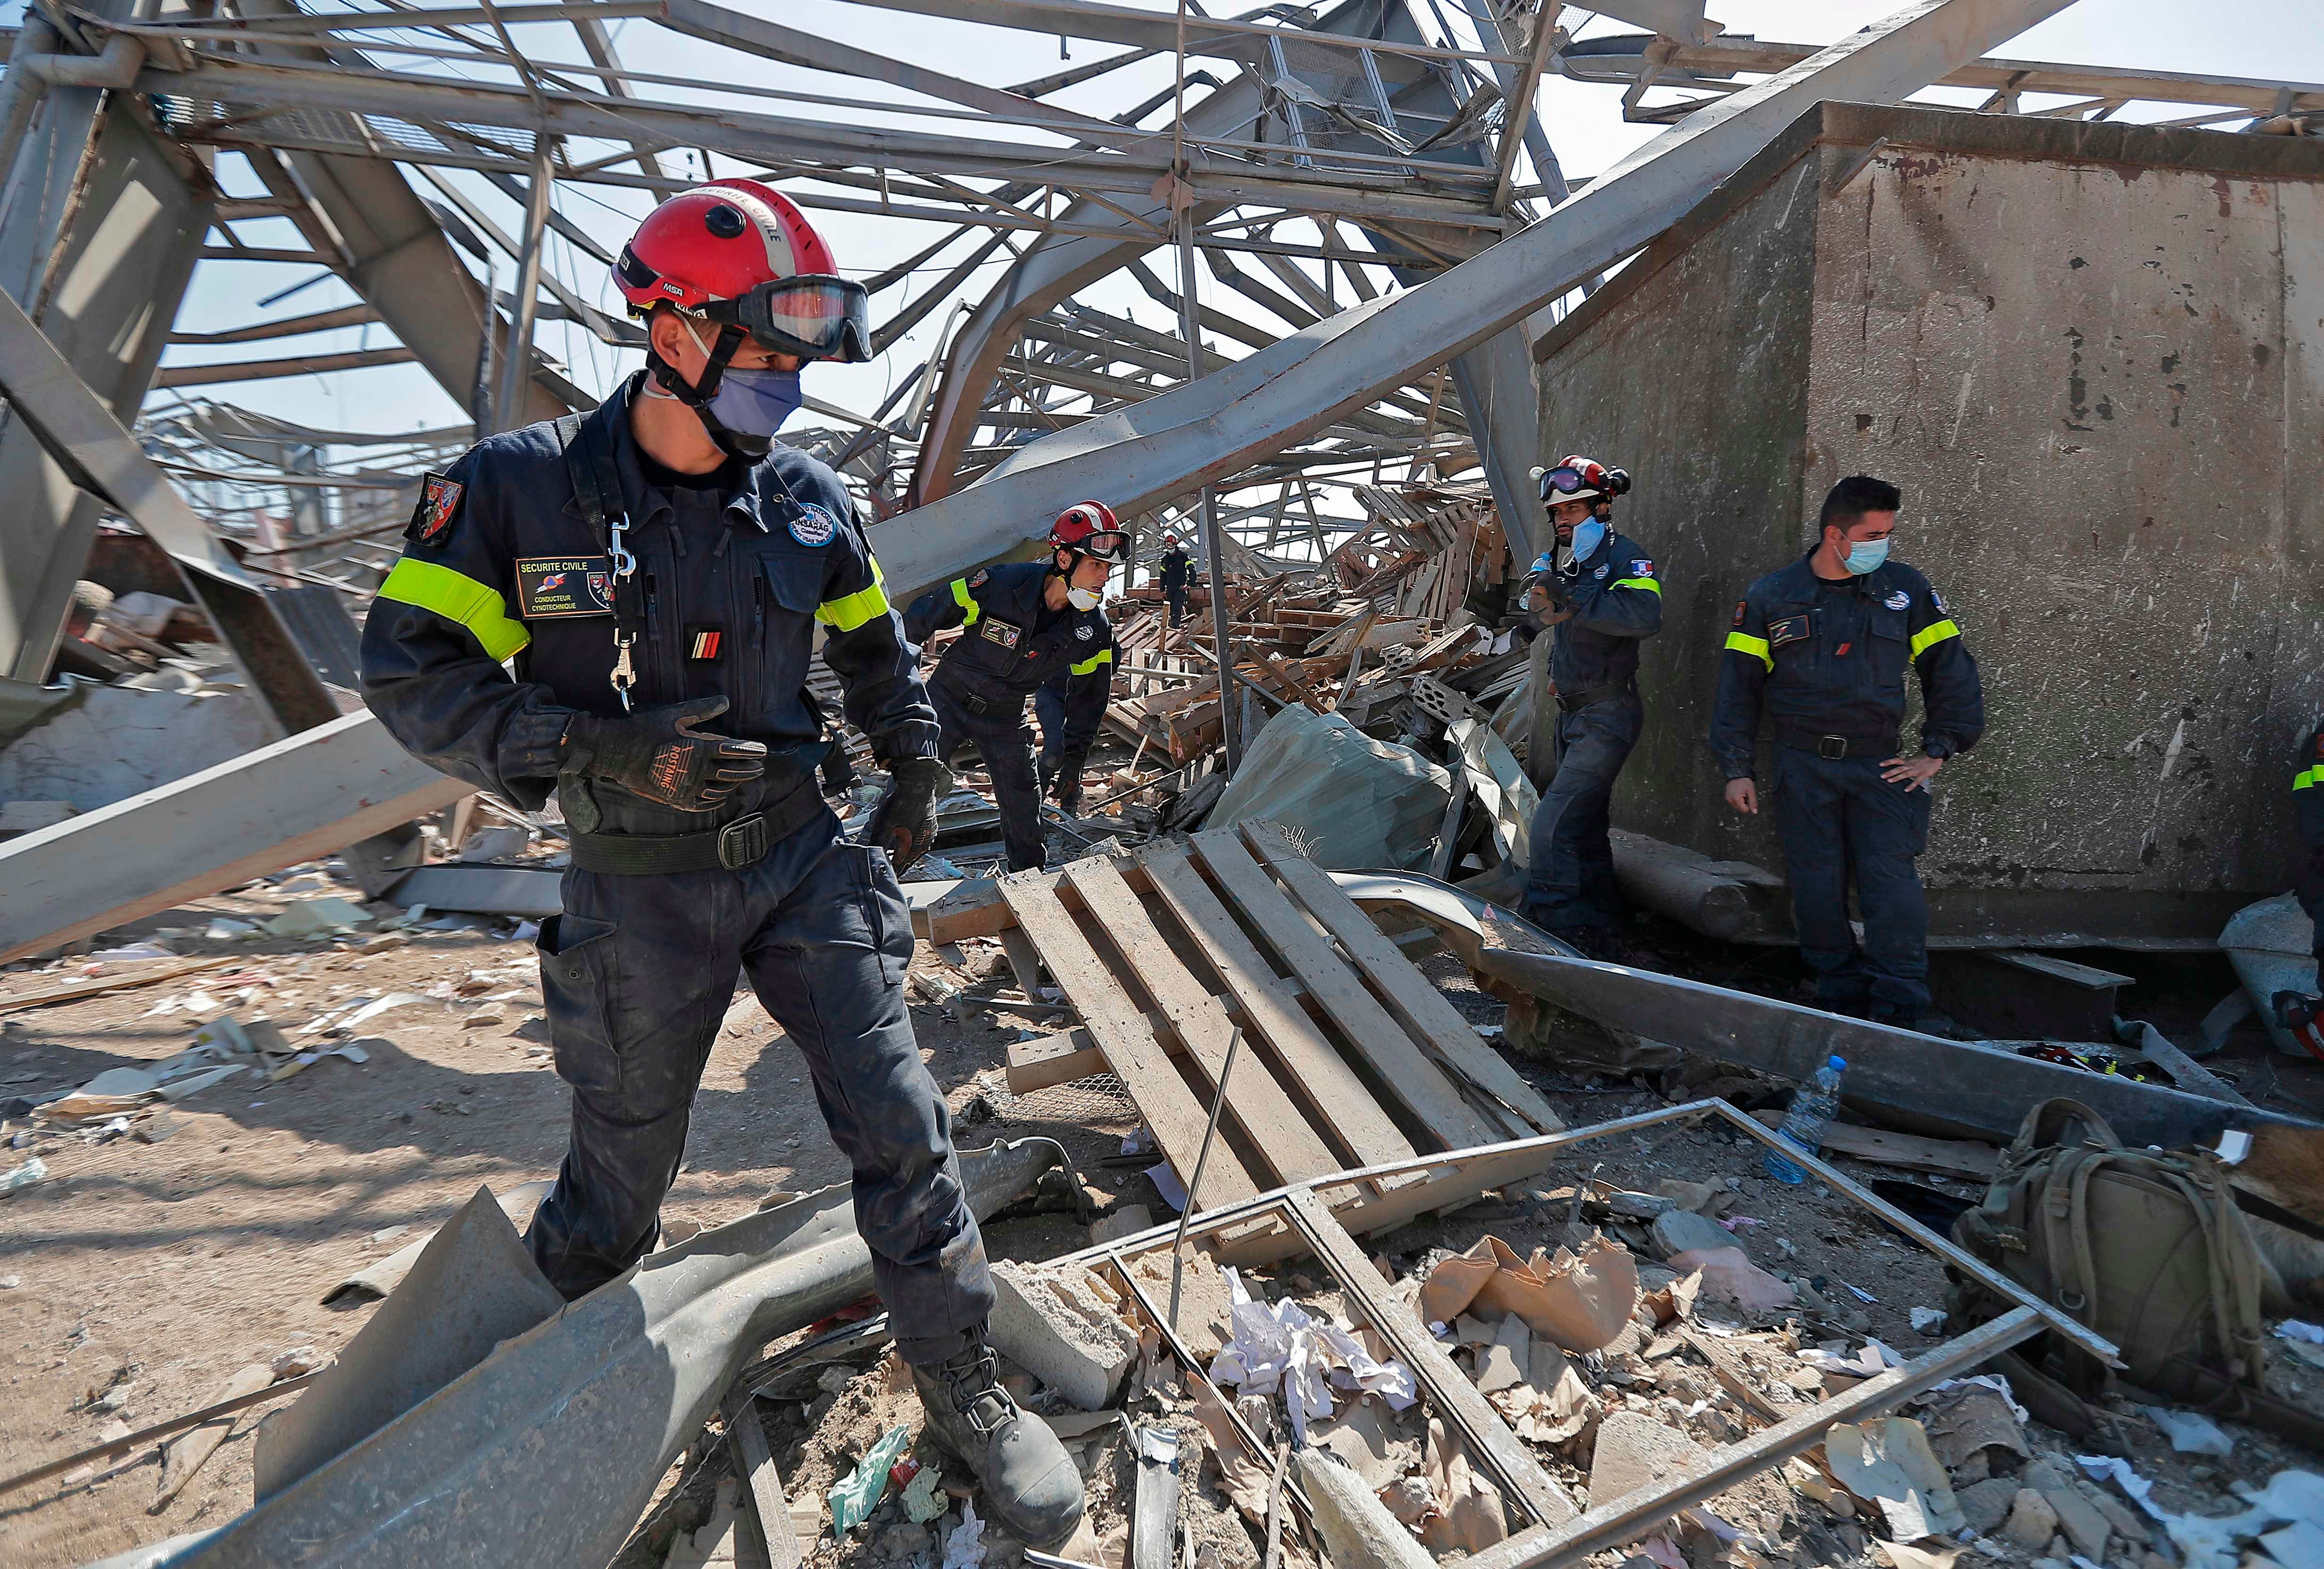 French rescue workers search through the rubble in the devastated Beirut port on August 7, 2020, three days after a massive blast there shook the Lebanese capital. Credit: AFP Photo